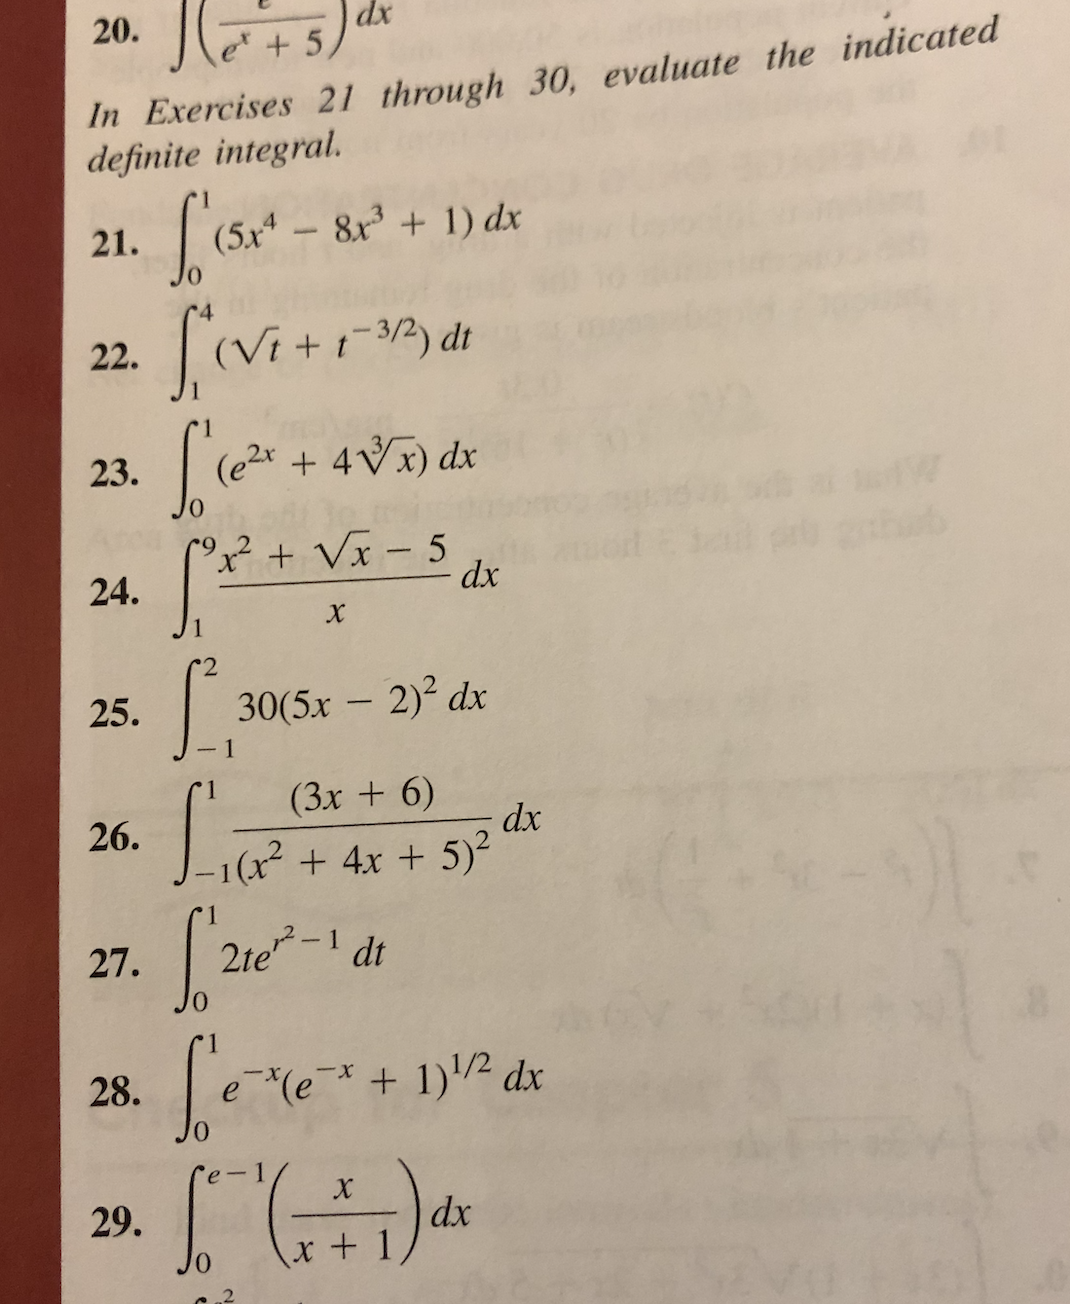 20.
+5,
In Exercises 21 through 30, evaluate the indicated
definite integral.
21.
(5x4
8x +1) dx
22. (vi+r dt
23.
(e2x + 4Vx) dx
² + Vx – 5
- dx
|
24.
1
25.
30(5x – 2)2 dx
(3x + 6)
dx
-1(x² +4x + 5)²
26.
27.
2te'
dt
x+ 1)2 dx
X-
28.
29.
dx
